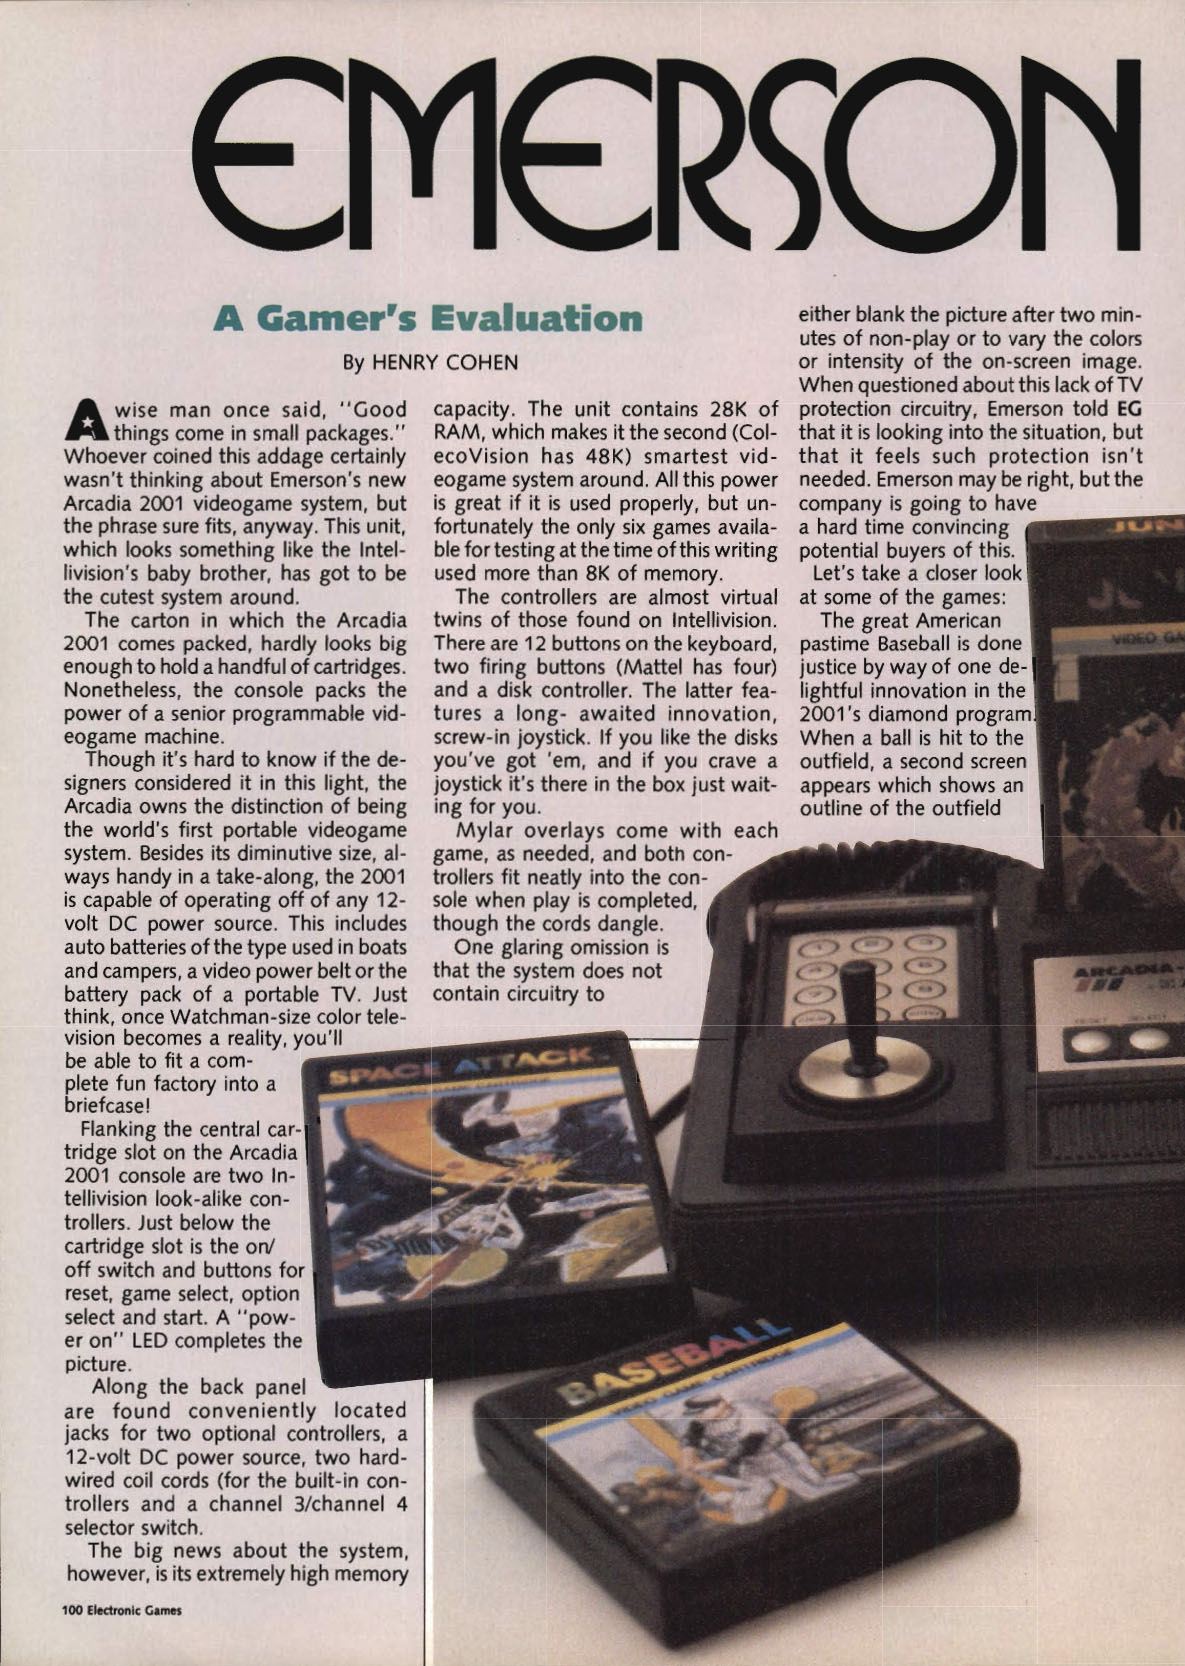 Emerson Arcadia 2001 - A Gamer's Evaluation, Electronic Games November 1982 page 100